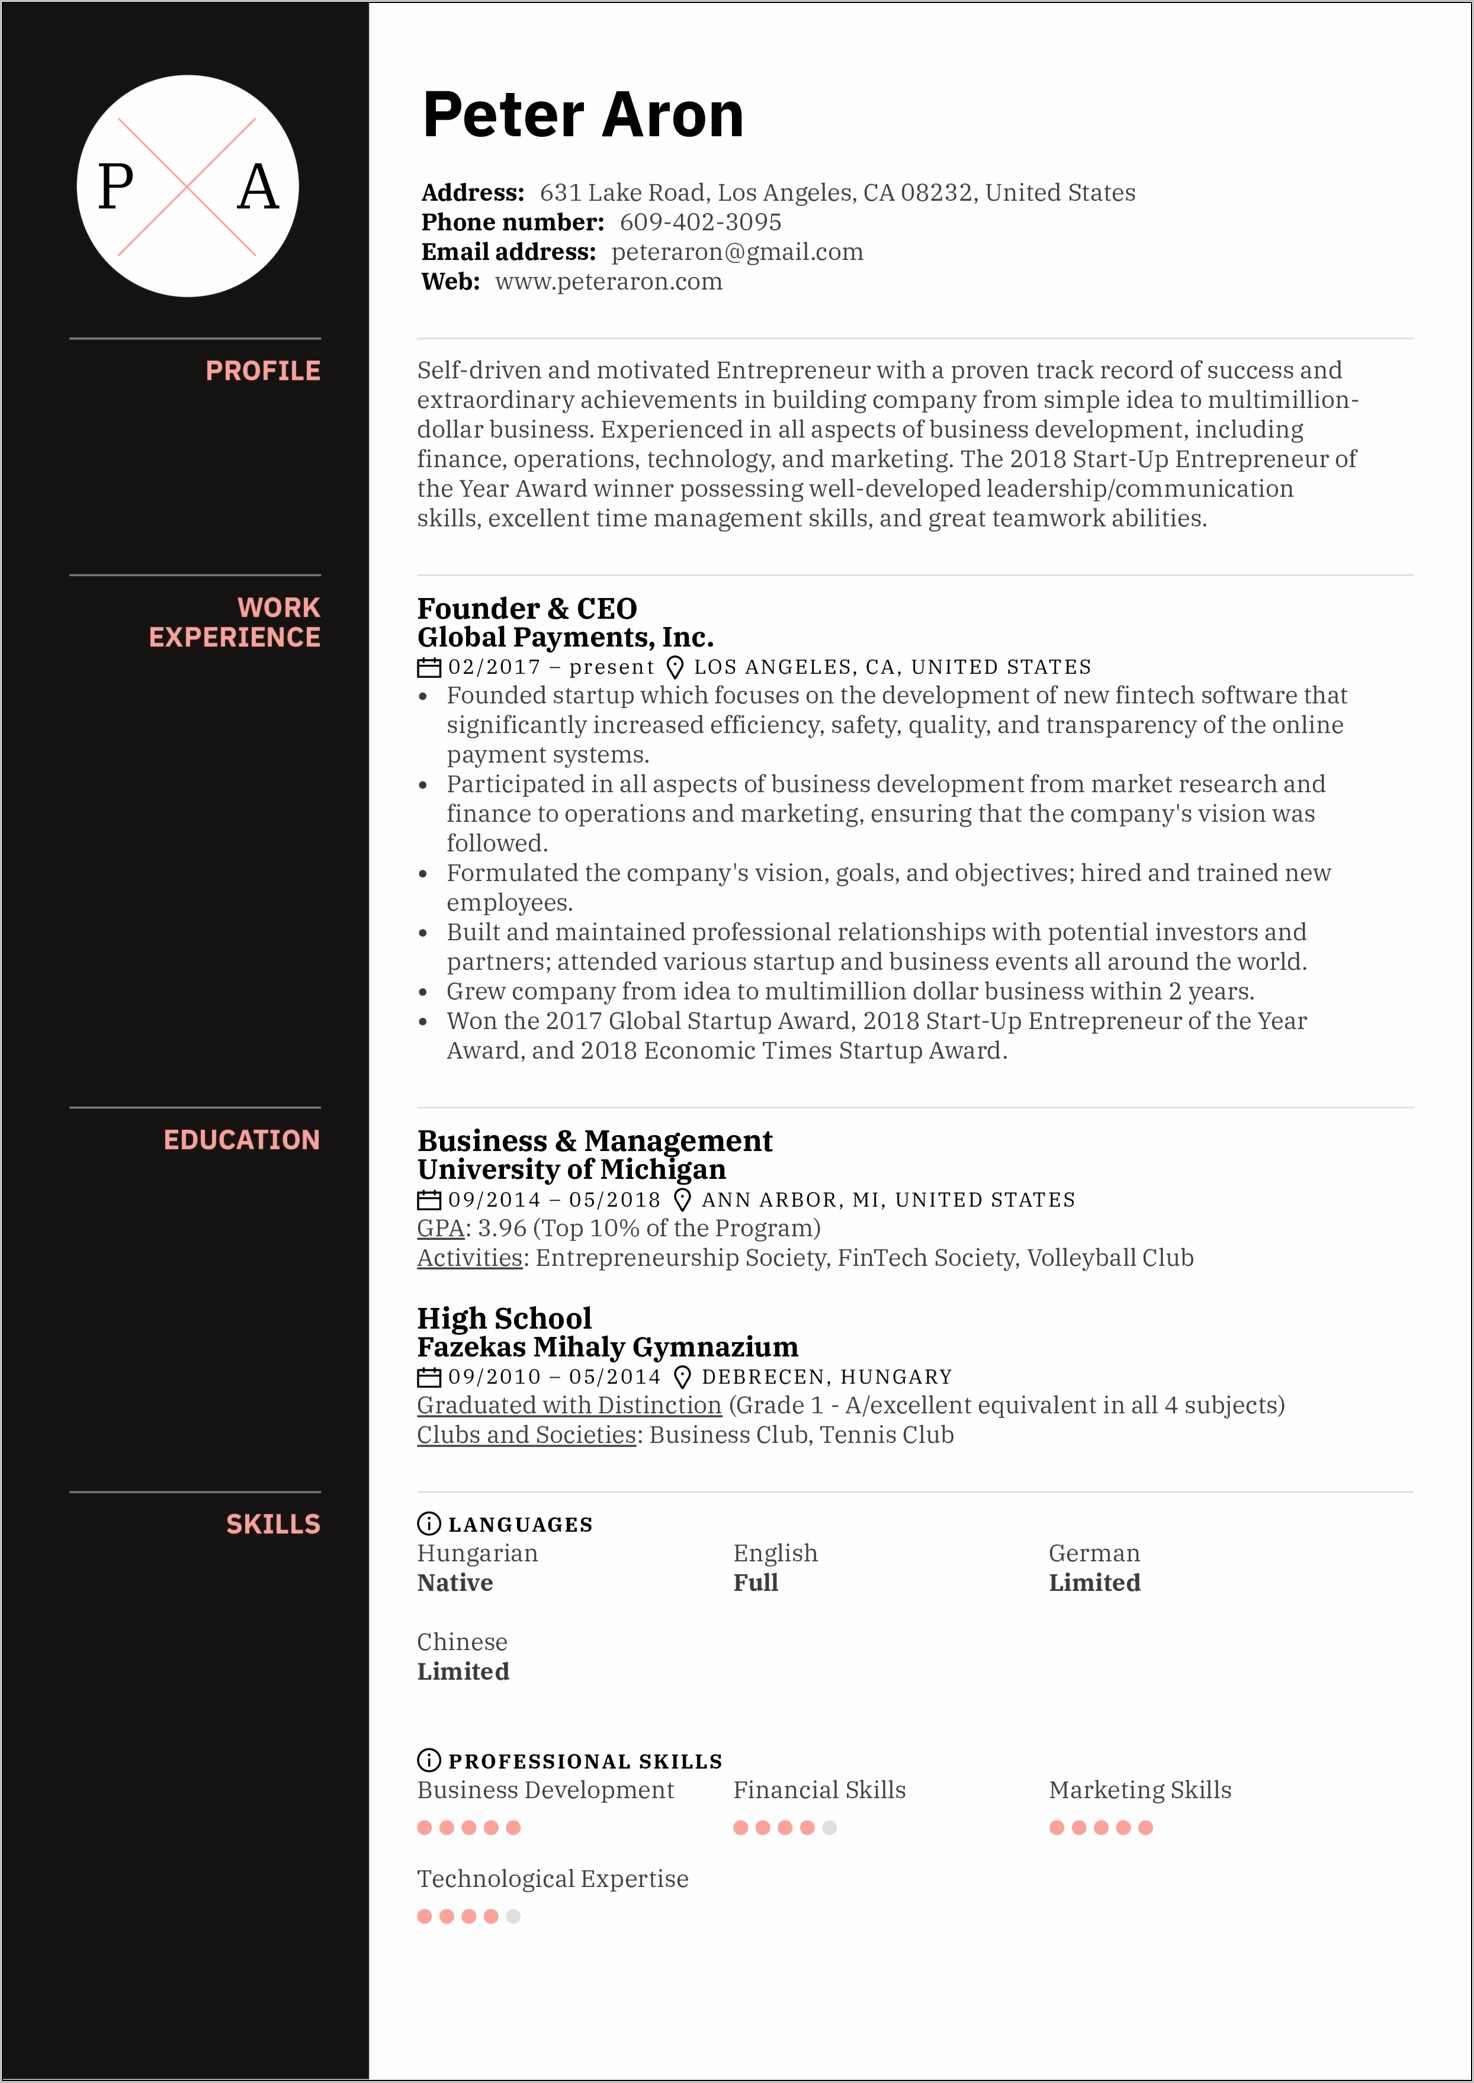 Resume Examples For Business Leadership Positions